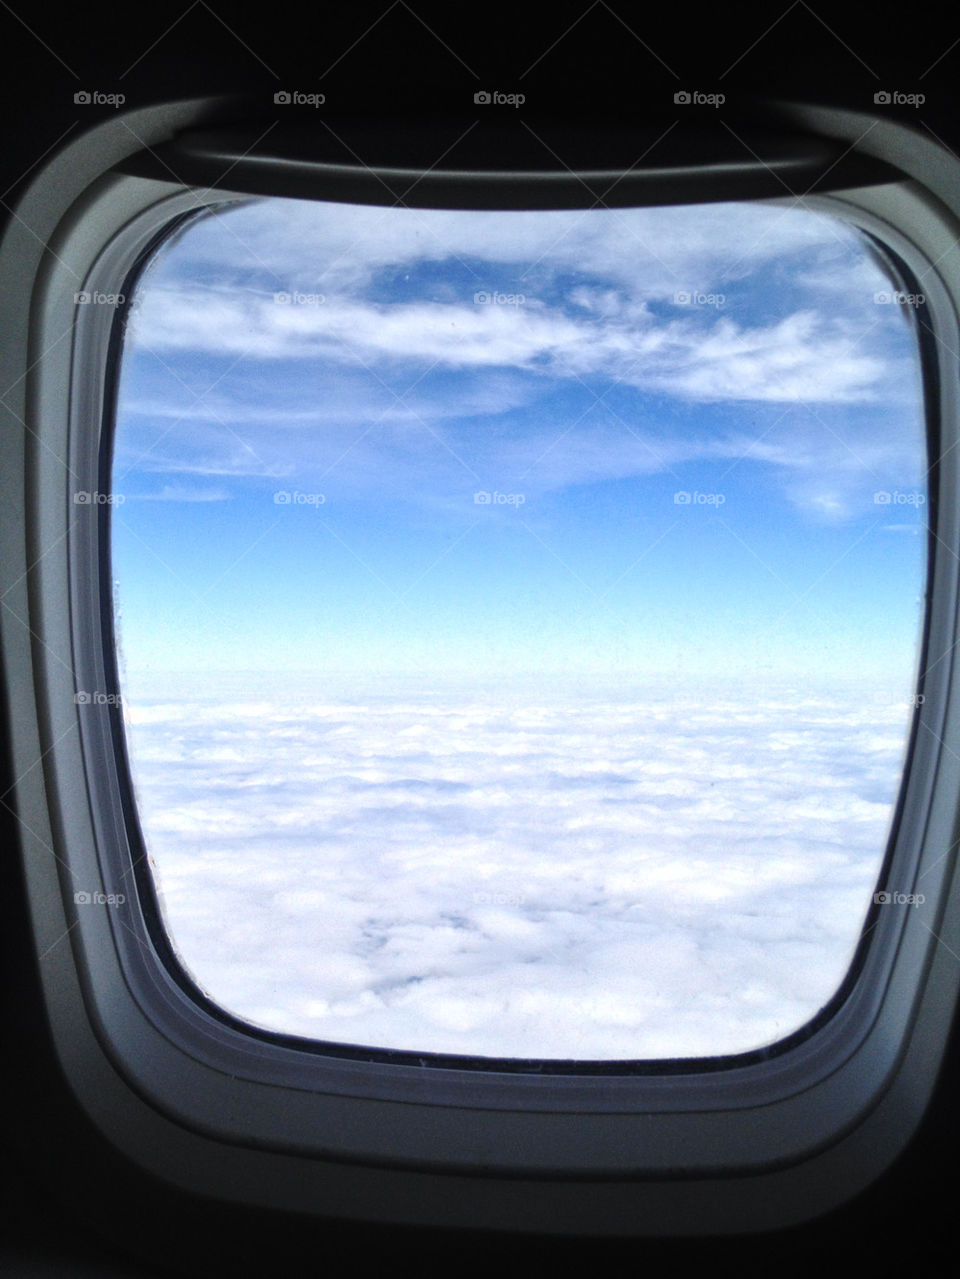 Looking out an airplane window